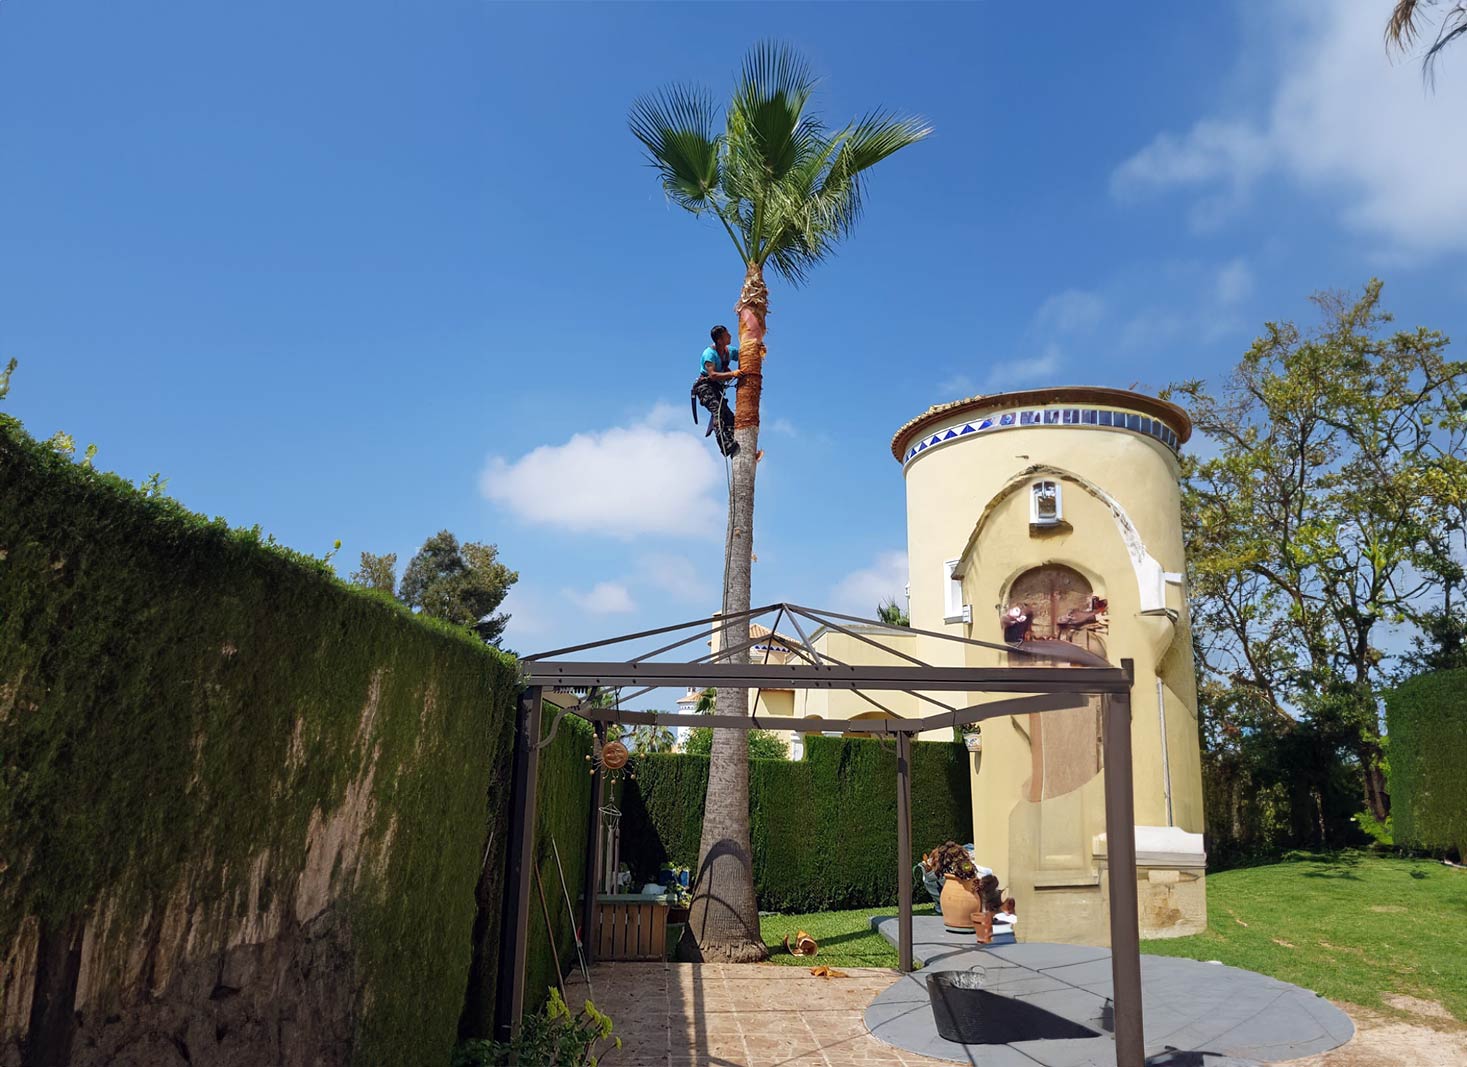 Hiring a professional palm tree trimming service in Phoenix